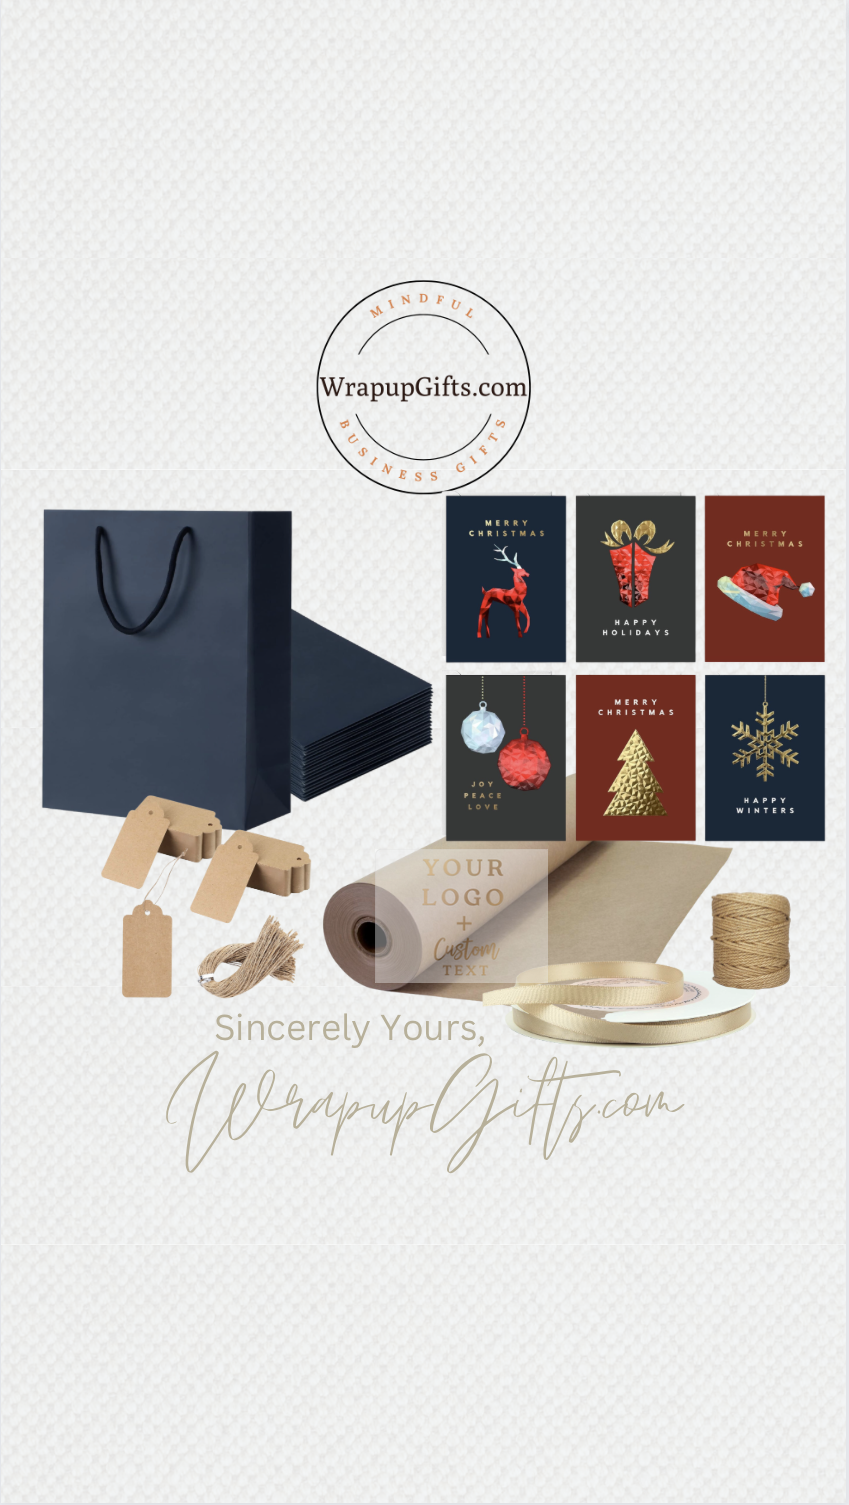 Unlock the door to unforgettable client connections with our curated business gifts. From timeless classics to modern finds, explore stylish and affordable options under $50. Elevate your gifting game with designer touches, cultural relevance, and personalized flair. Discover the art of thoughtful gift-giving with our pro tips on wrapping, personalizing, and navigating business gift etiquette. Make a lasting impression and show your appreciation. Explore now! WrapupGifts.com Best Closing Gifts, Business gifts, Realtor Gifts, Gifts for clients, Client gifts, Curated Gift Ideas, Seasonal Gifts, Gift Consulting, Pro Tips for Business Gifts, How to wrap a business gift, how to personalize a business gift, appropriate business gifts, curated business gift ideas, closing gifts, what to give to a client as a gift, how to gift a business gift, corporate gifts, culturally appropriate gifts, stylish gifts, designer gifts, inexpensive stylish gifts, inexpensive gifts, gifts under $25, gifts under $50, housewarming gifts, Christmas gifts, thank you gifts, thank you cards, thanksgiving gifts, thanksgiving cards, pottery barn style, crate&barrel style, cb2style, creative gifts, modern gifts, gift finds, trending gifts, trending gift ideas, best gift ideas, gift ideas community, business gifts guide, gift ideas, gift guide, gifts guide, seasonal gifts, timeless gifts, quality gifts, classic gifts, beautiful gifts, business gifts baskets, business gifts basket ideas, business gifts tax deductible, business gift certificate, business gifts for employees, custom business gifts, customizable business gifts, business gift bags, business gift limitation, business gifts with logo, business gifts with custom logo, business gift for him, business gifts limit, business gifts schedule, business gifts tax treatment, business gift ideas, business gift deduction, business gift bags, business gift card, business gift bag ideas, business gift certificate template